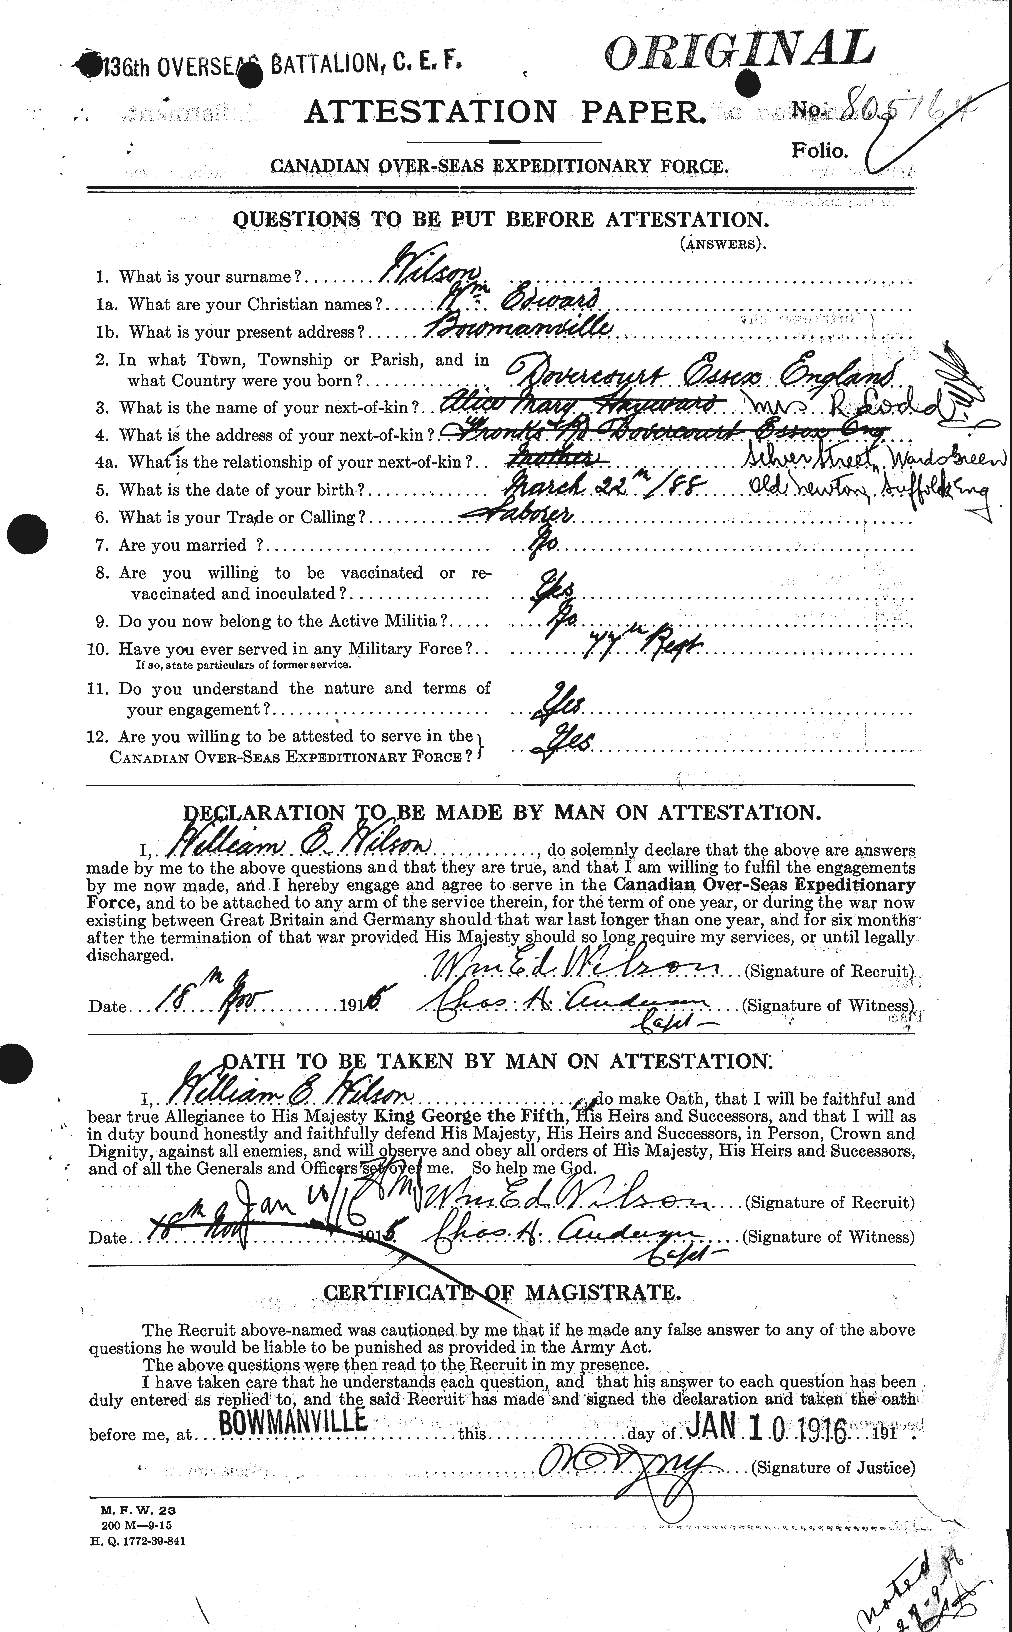 Personnel Records of the First World War - CEF 681975a